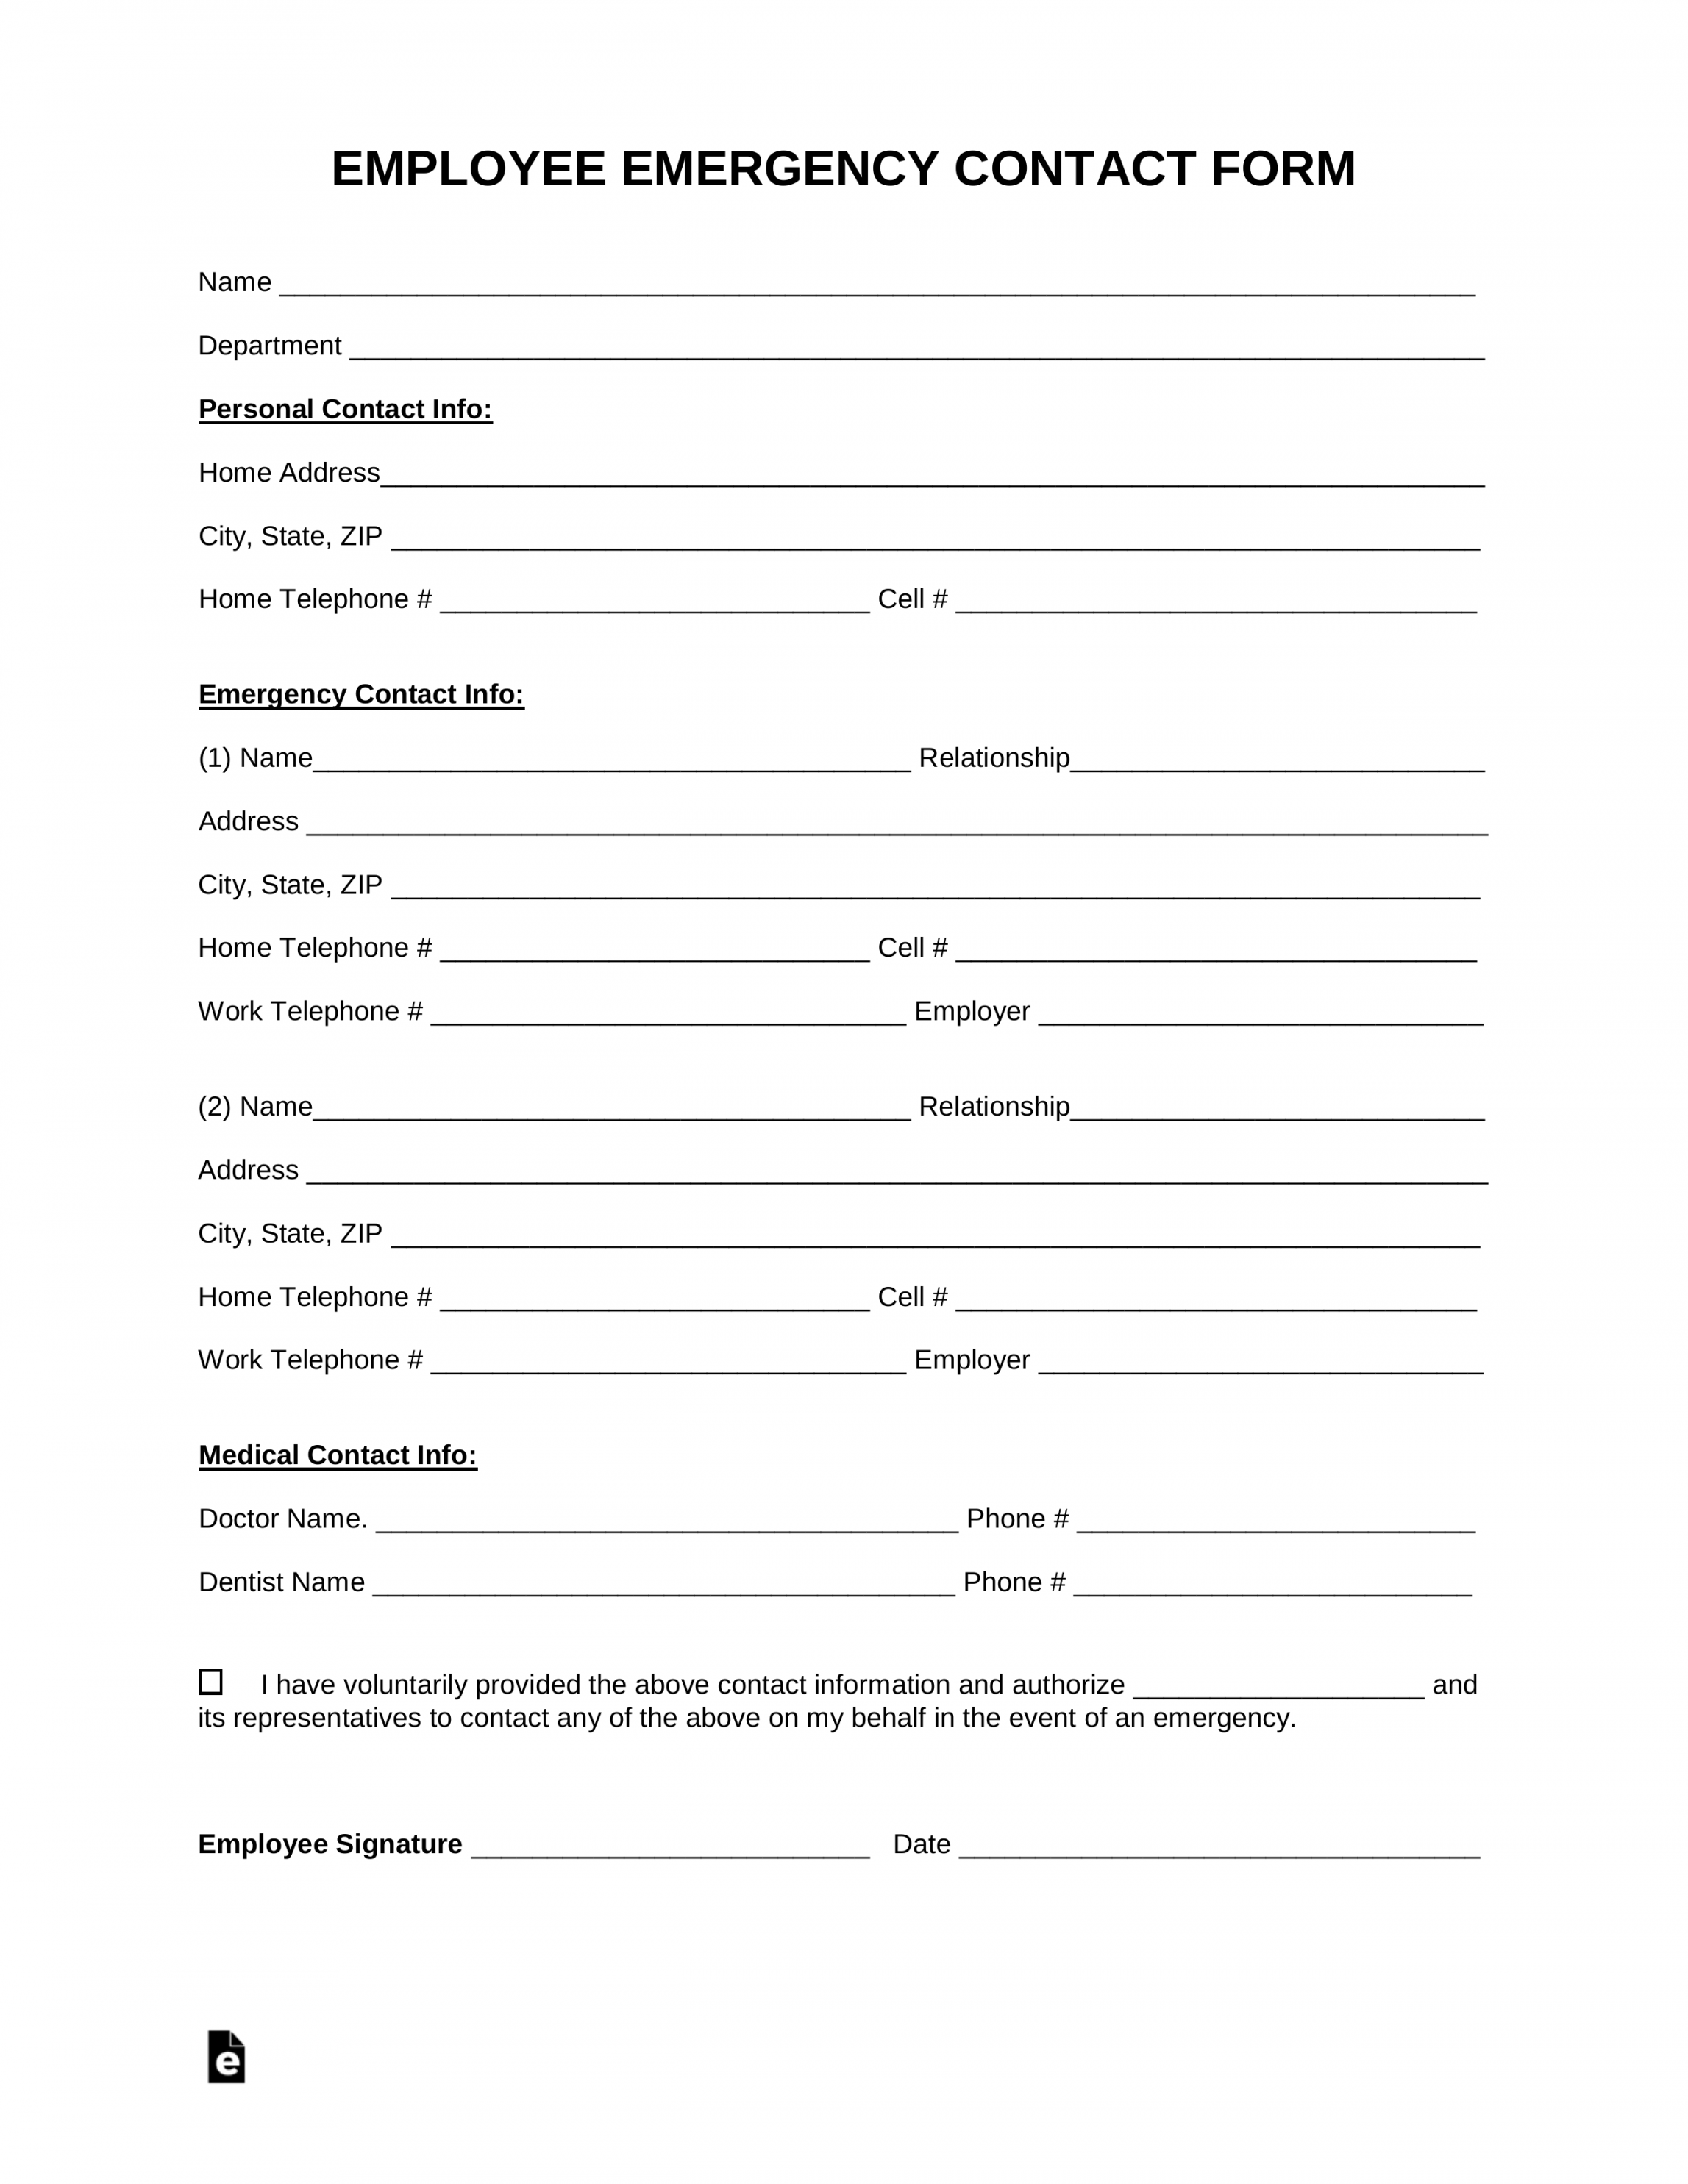 Free Employee Emergency Contact Form - PDF  Word – eForms - FREE Printables - Free Printable Emergency Contact Form